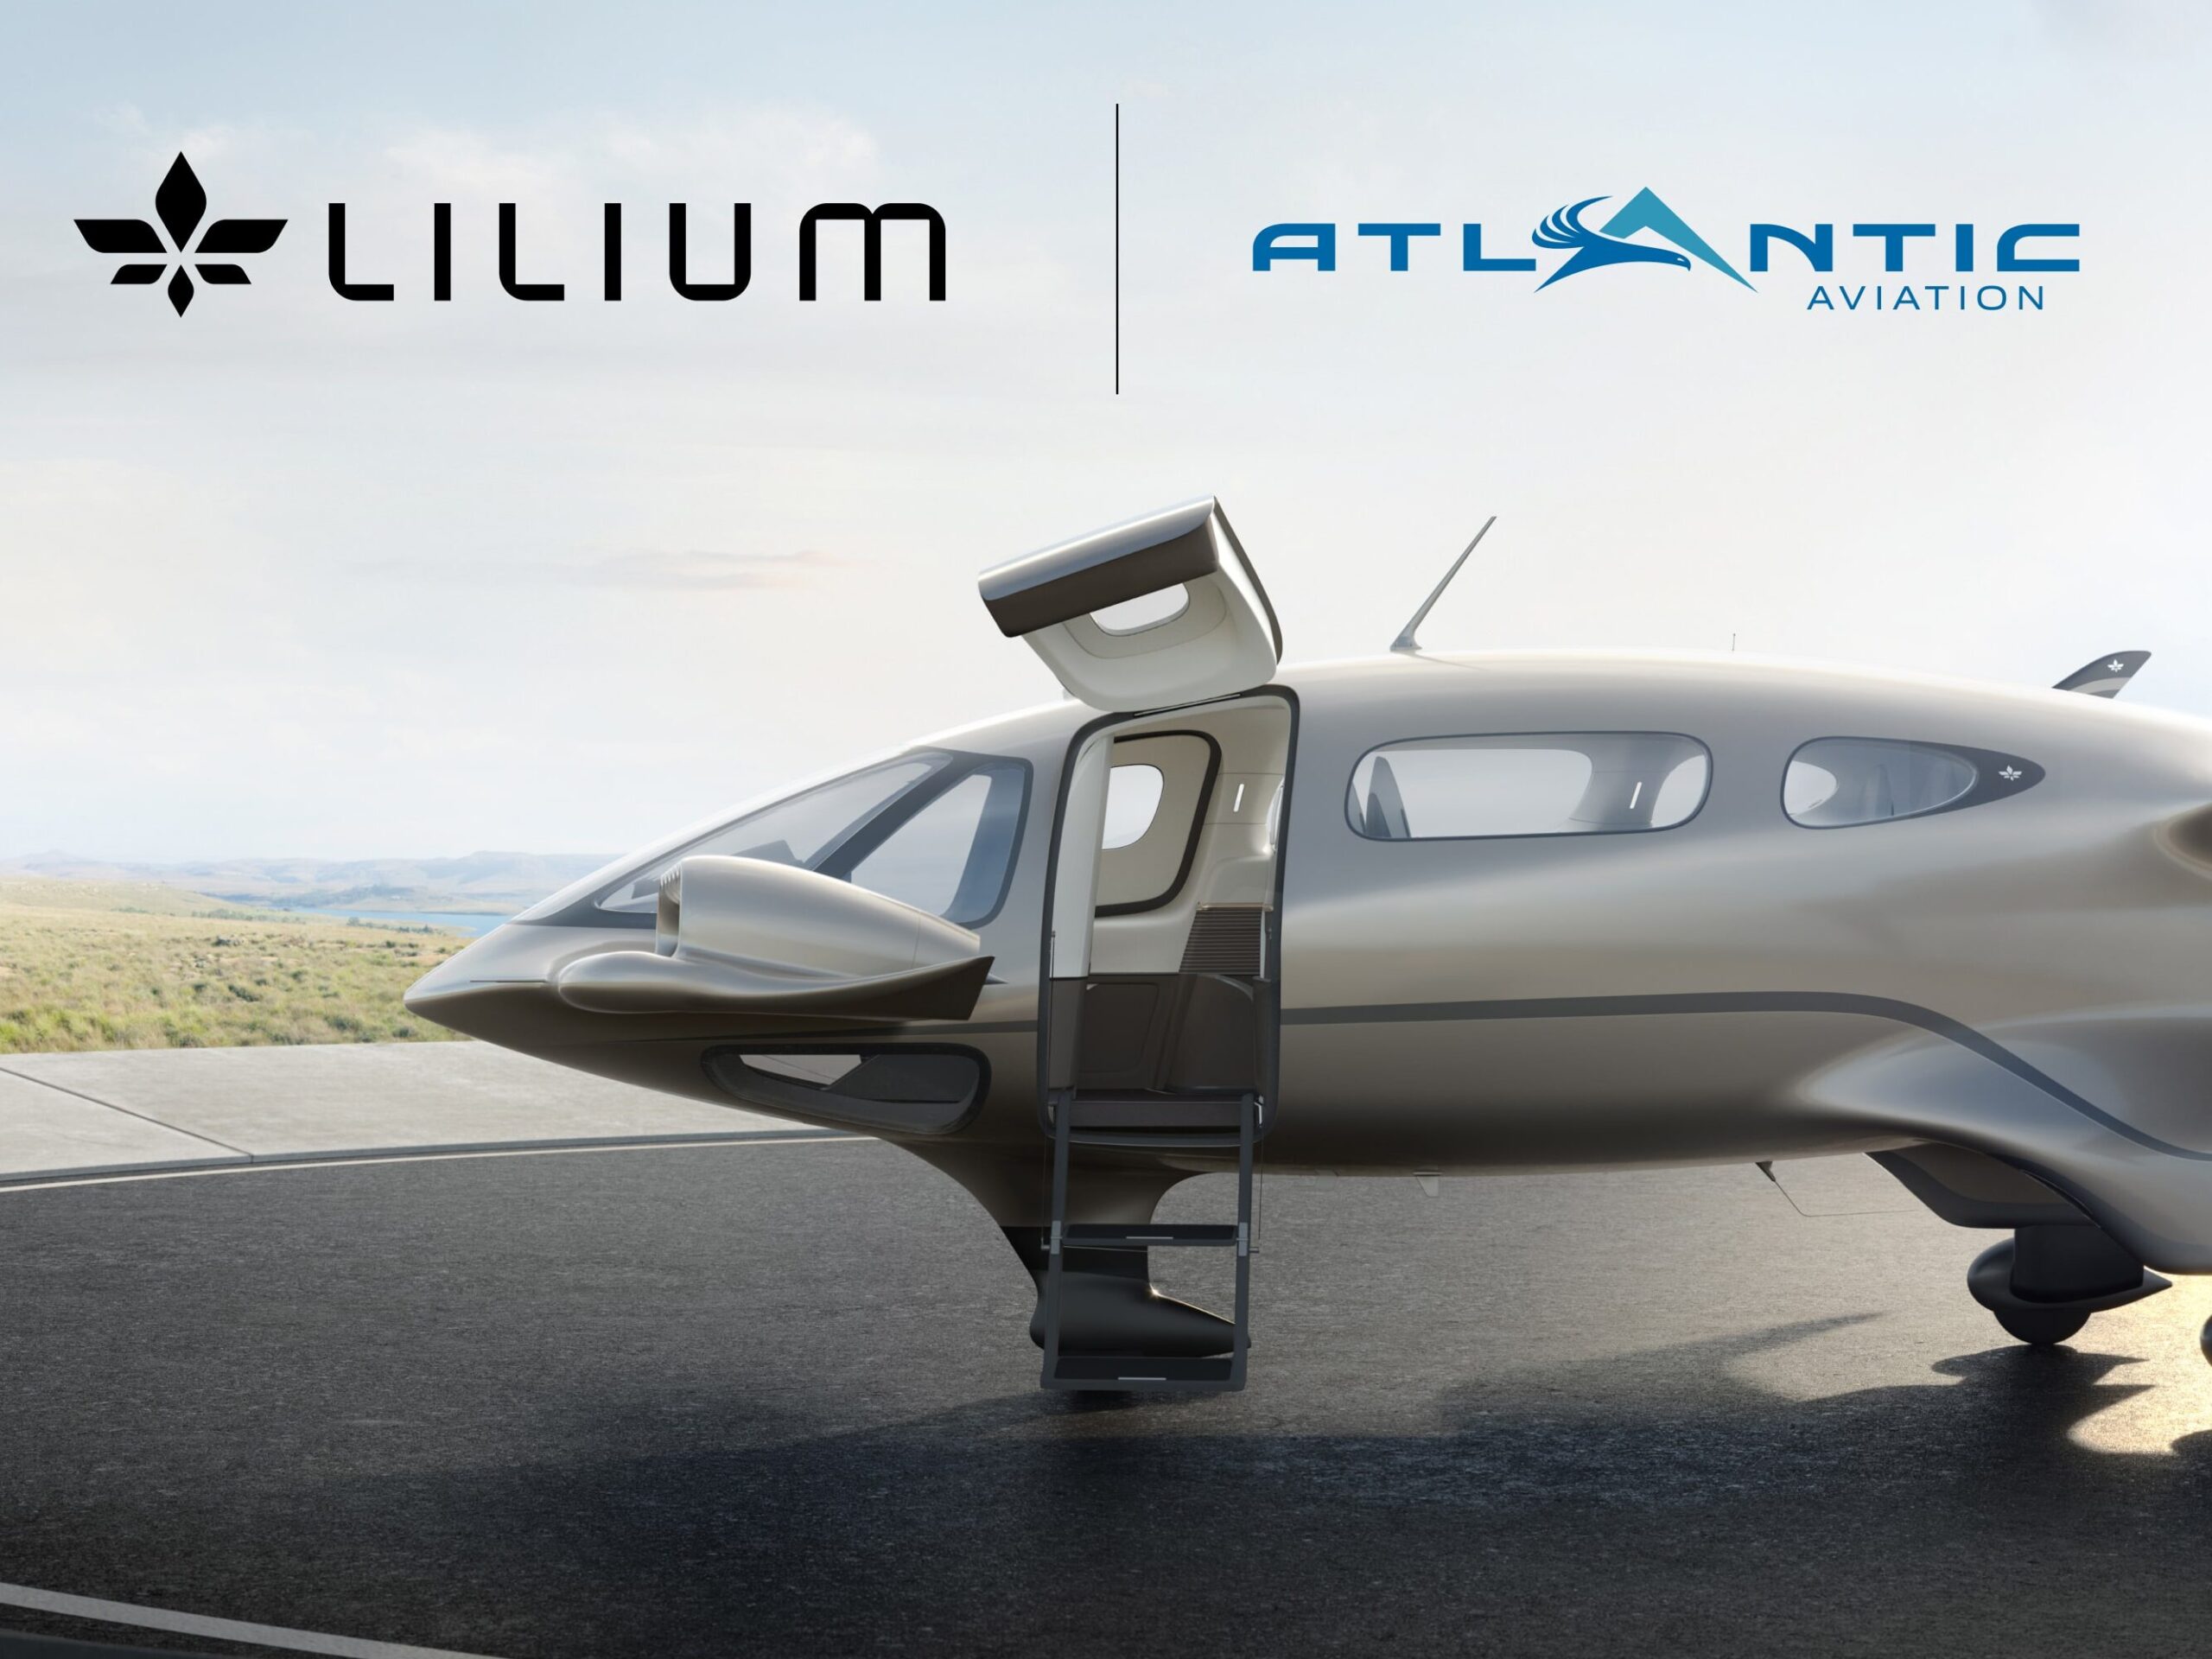 Lilium and Atlantic Aviation Partner to Electrify Airport Infrastructure